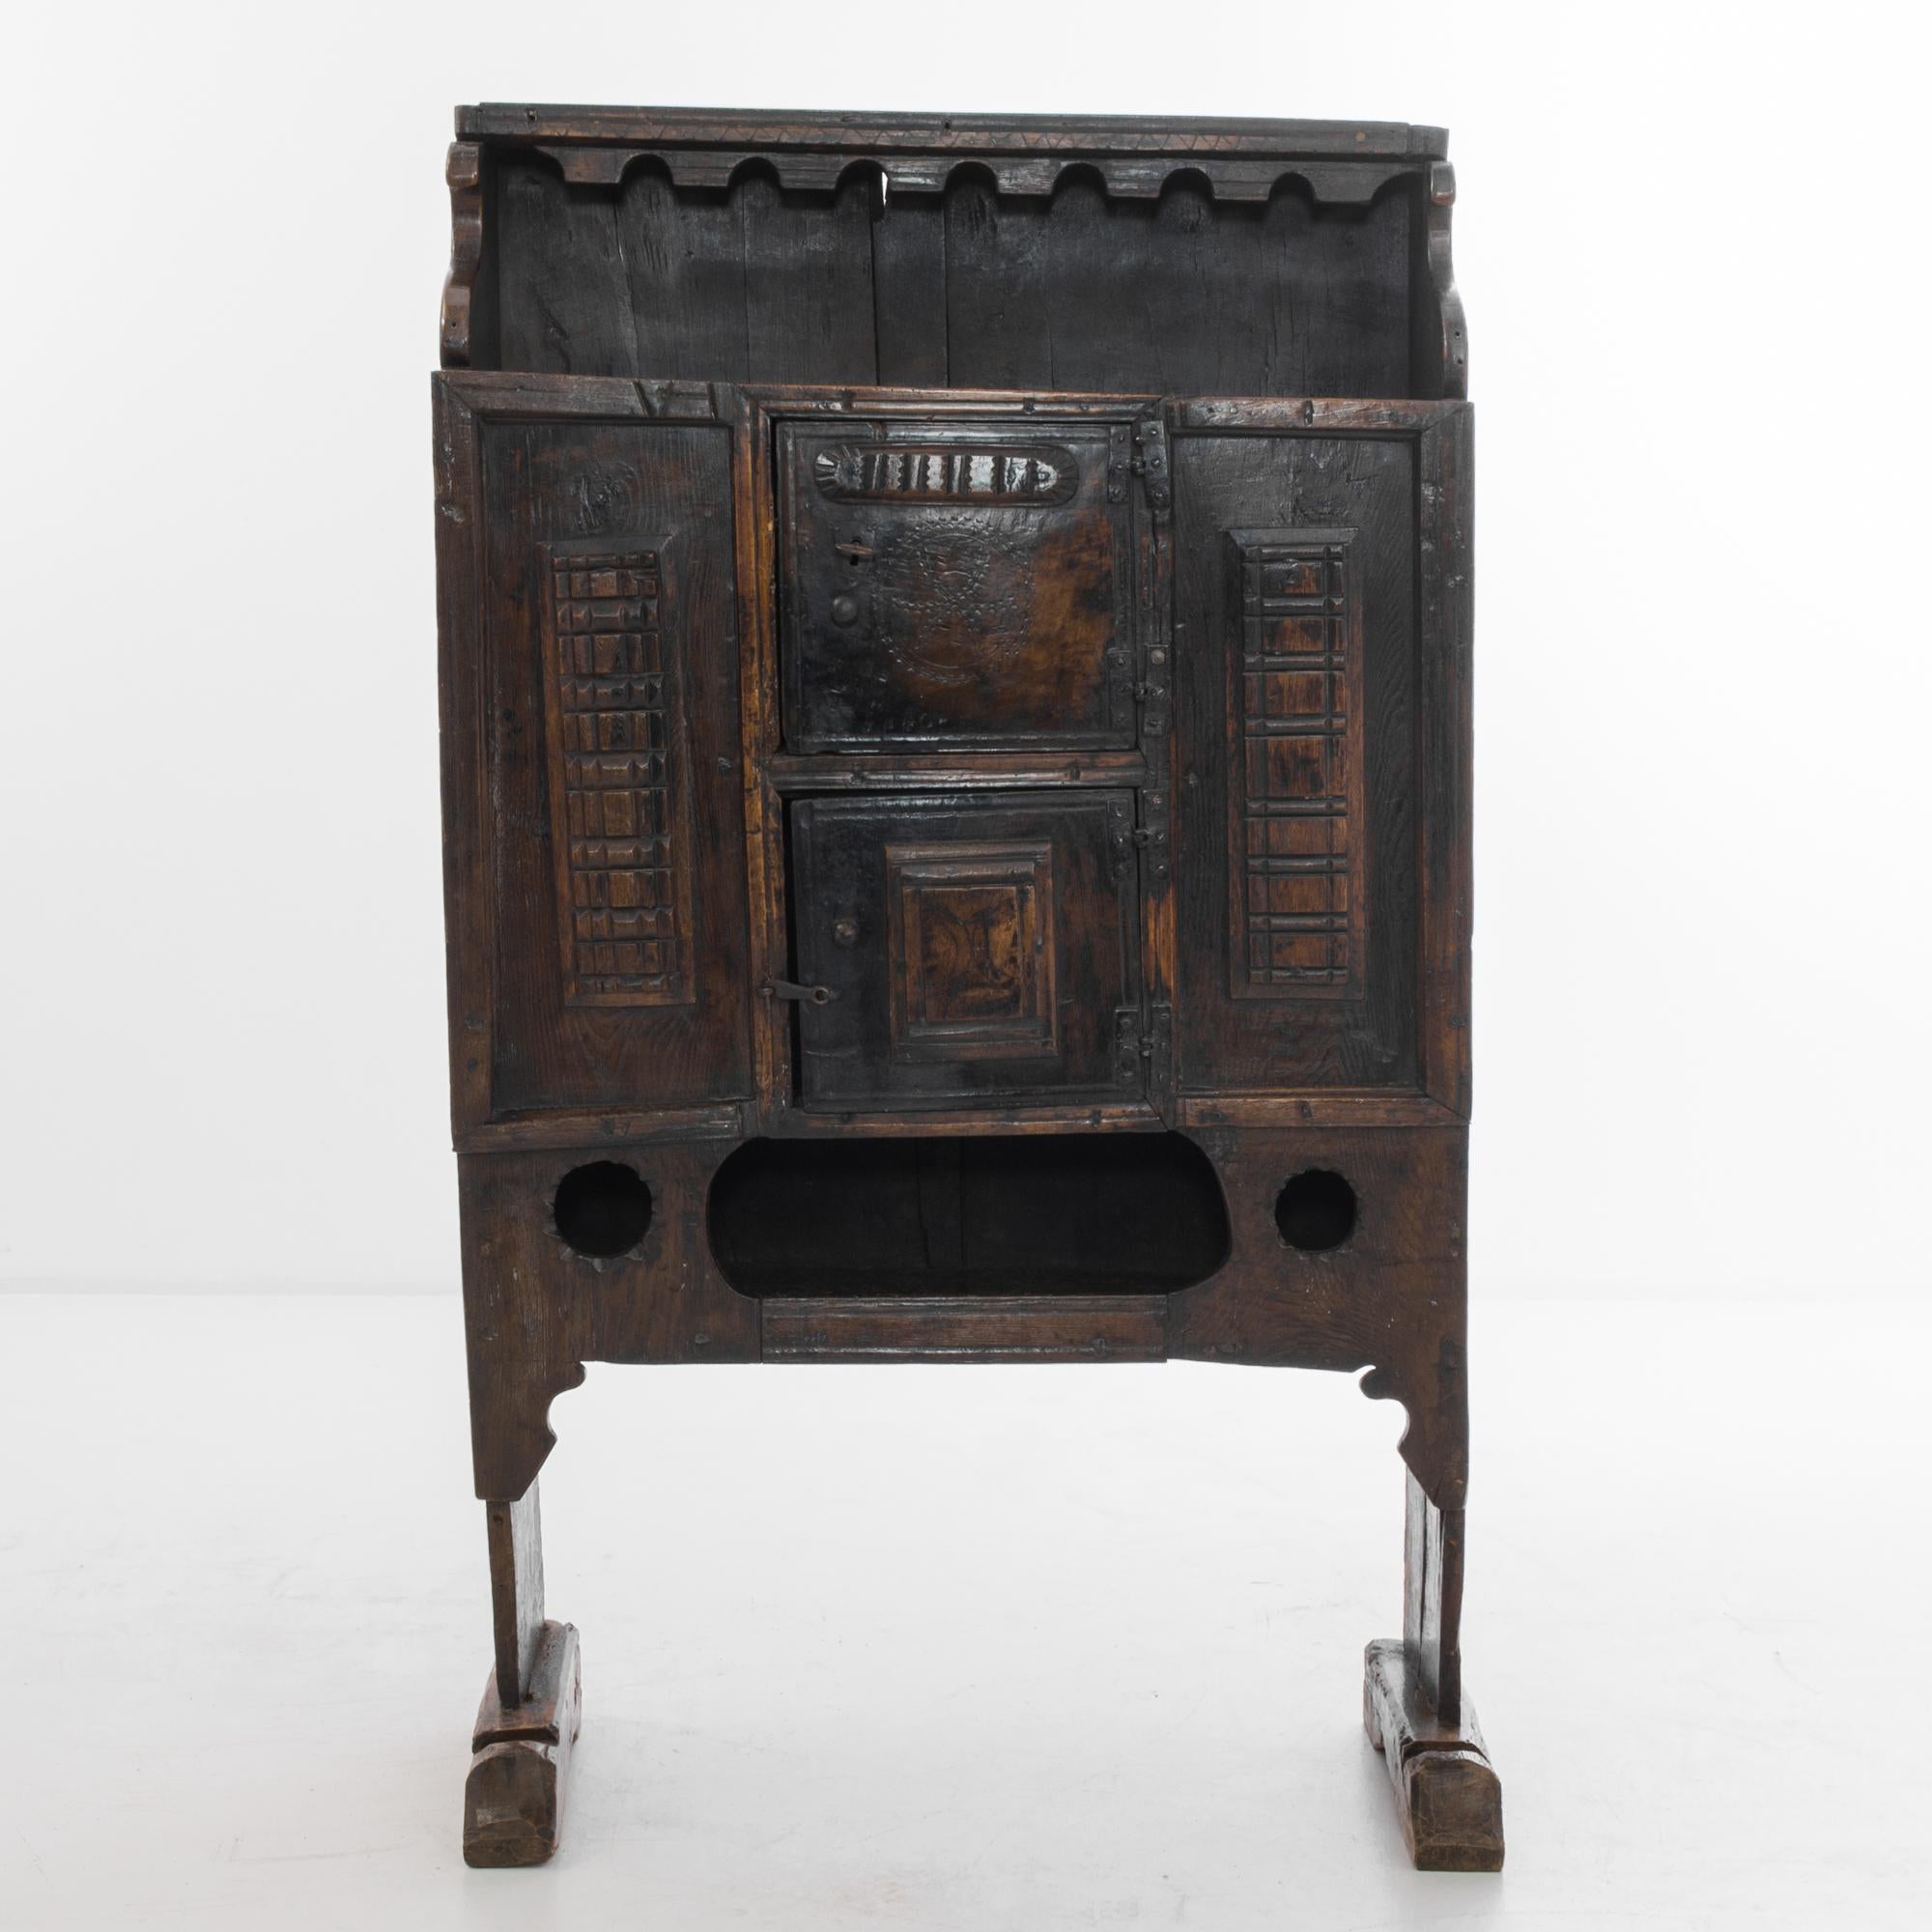 This wooden cabinet was made in Spain, circa 1700, and displays a deep, glossy sheen from the original patina, toned and polished by time. An exceptional find, the cabinet impresses with its handcrafted detail and rich ornamentation, from the